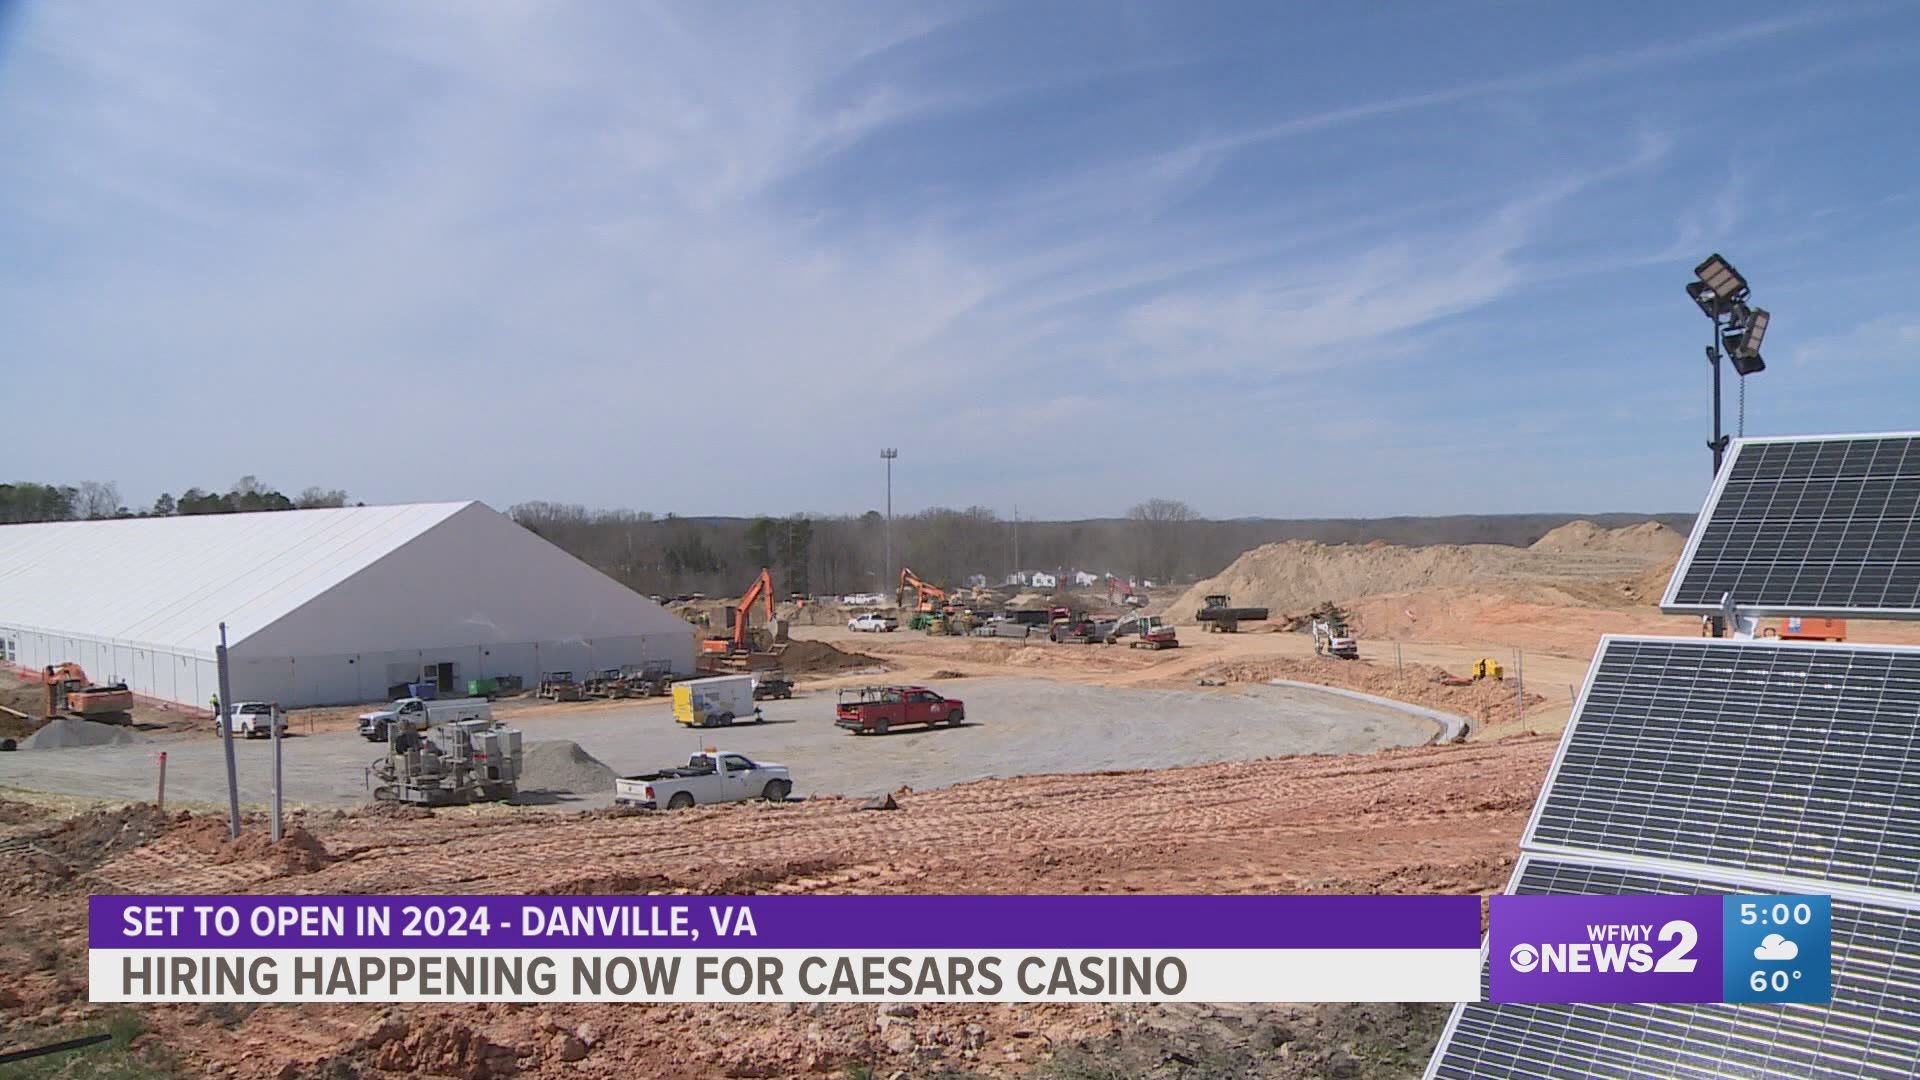 The new Caesars Casino in Danville, Virginia is set to open in 2024. It’s located less than an hour from Greensboro, NC.